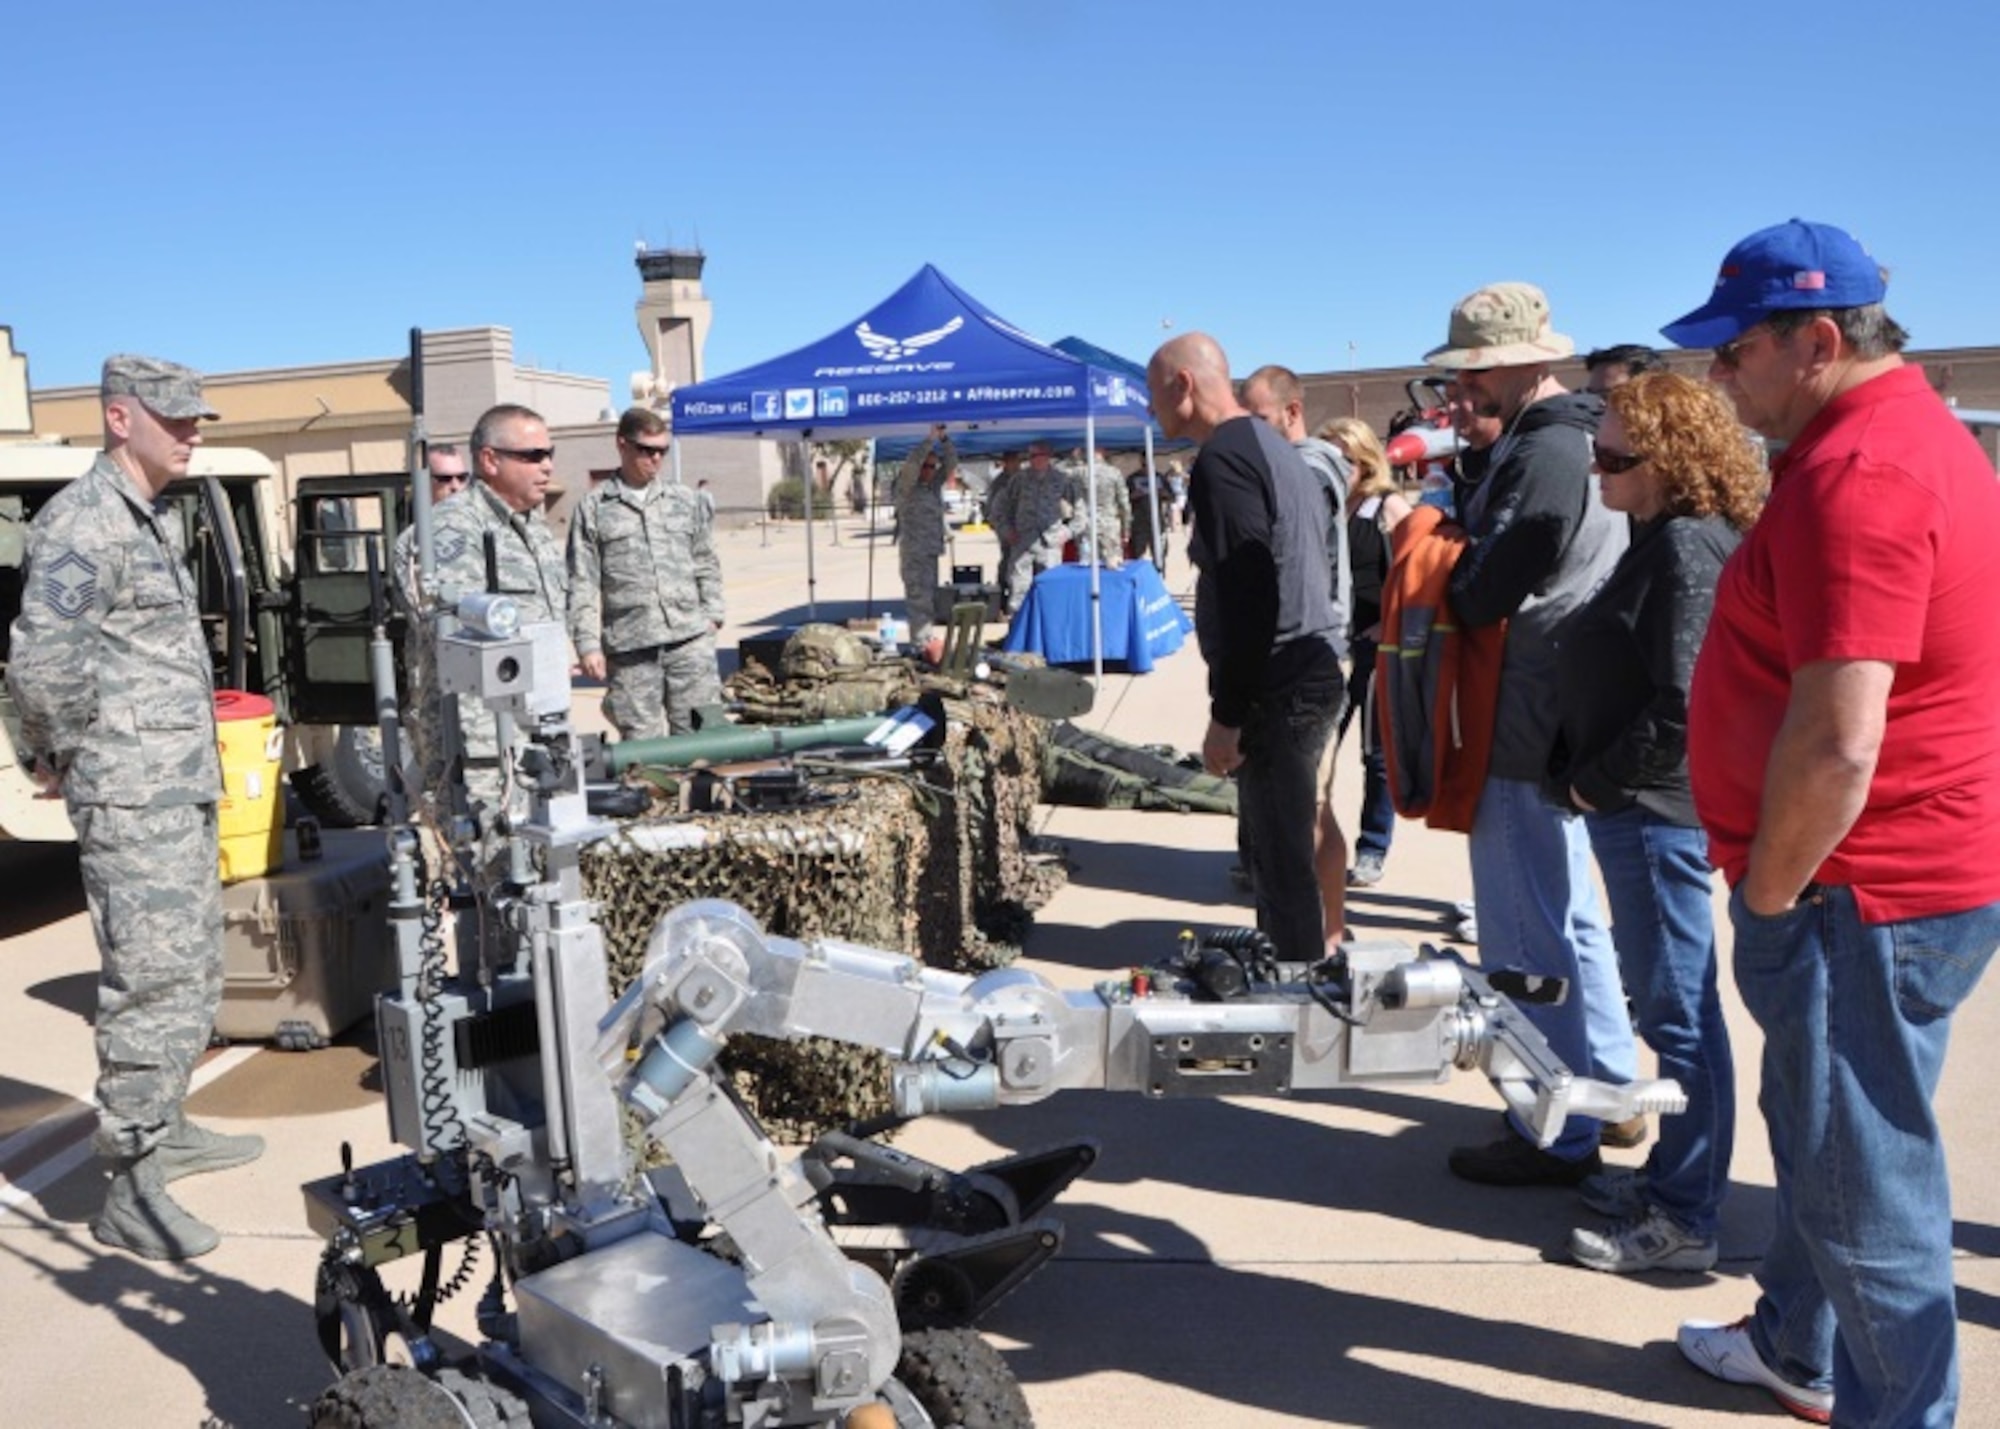 944th Civil Engineer Squadron explosive ordnance disposal members, provide an exhibit for 944th Fighter Wing Airmen civilian employers during the Boss’s Day event Nov. 7 at Luke Air Force Base, Ariz. (U.S. Air Force photo taken by Tech. Sgt. Barbara Plante)
